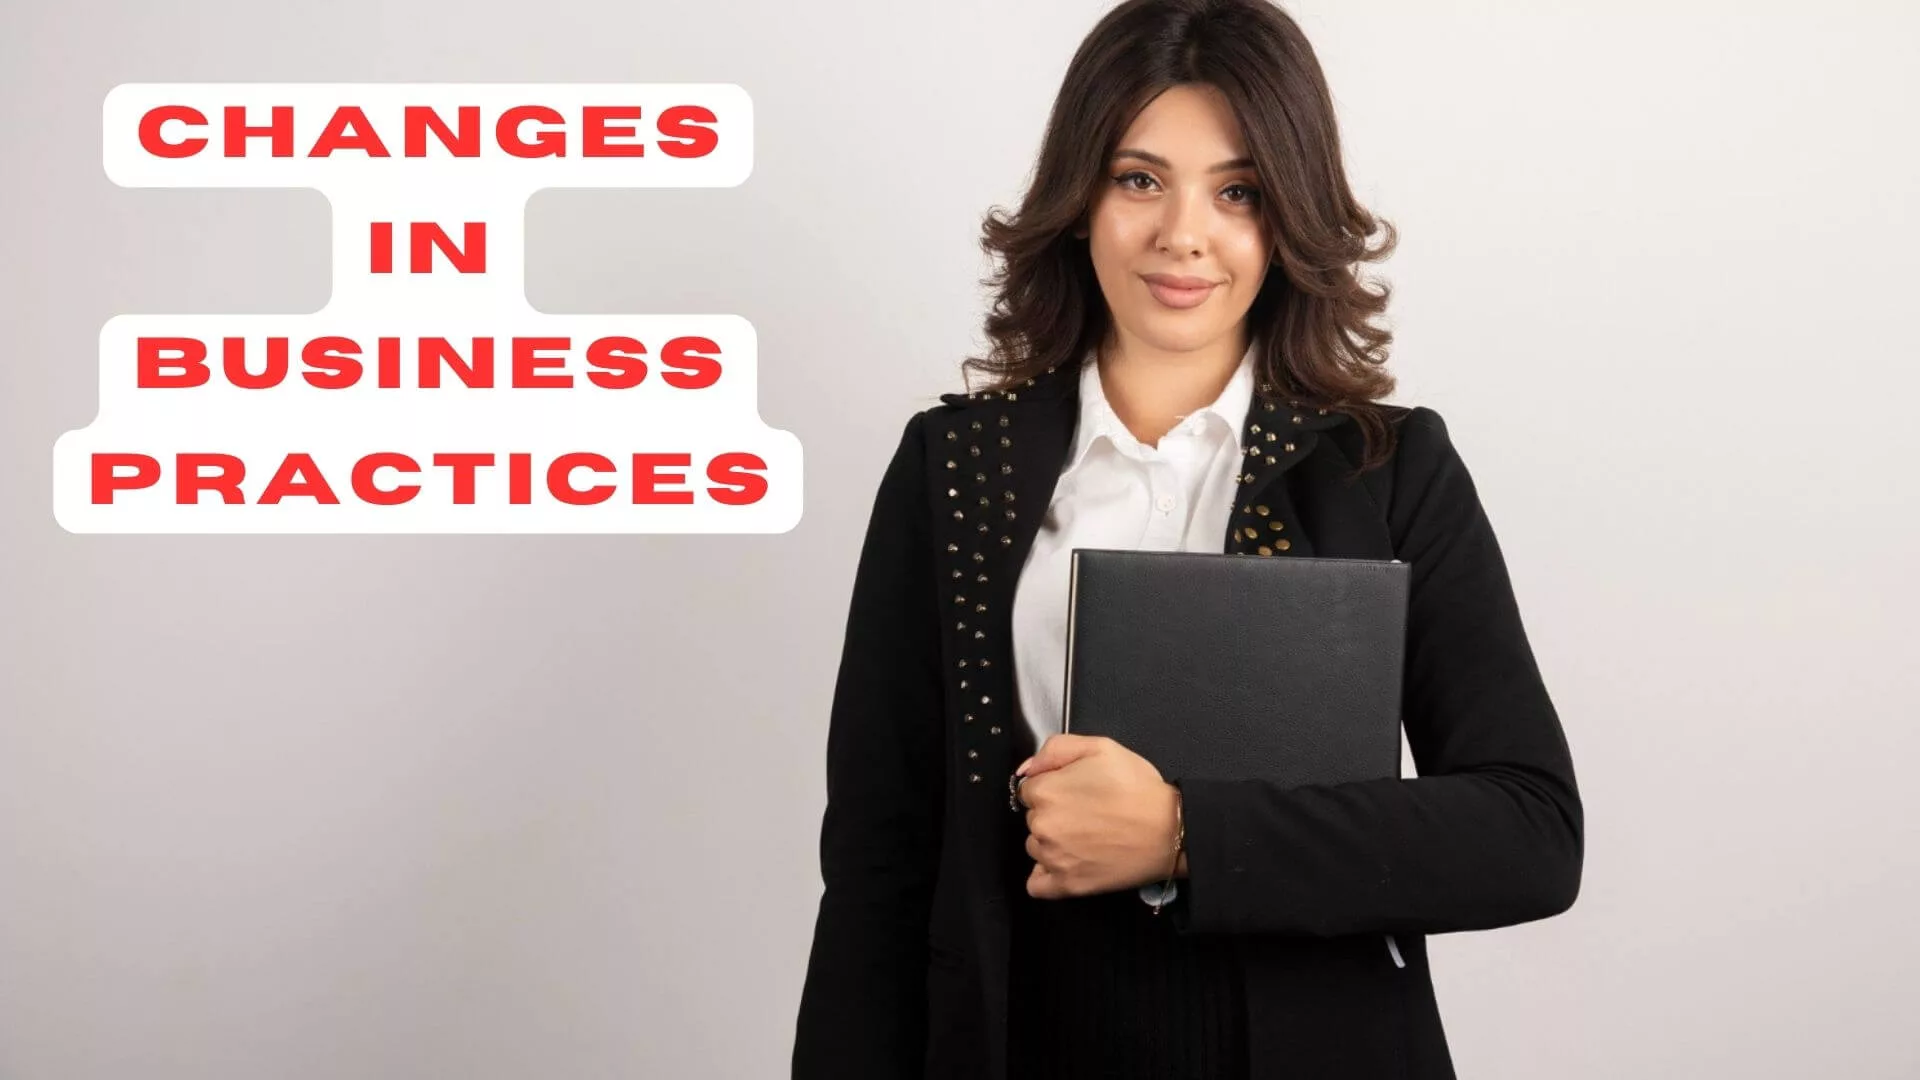 Changes in Business Practices